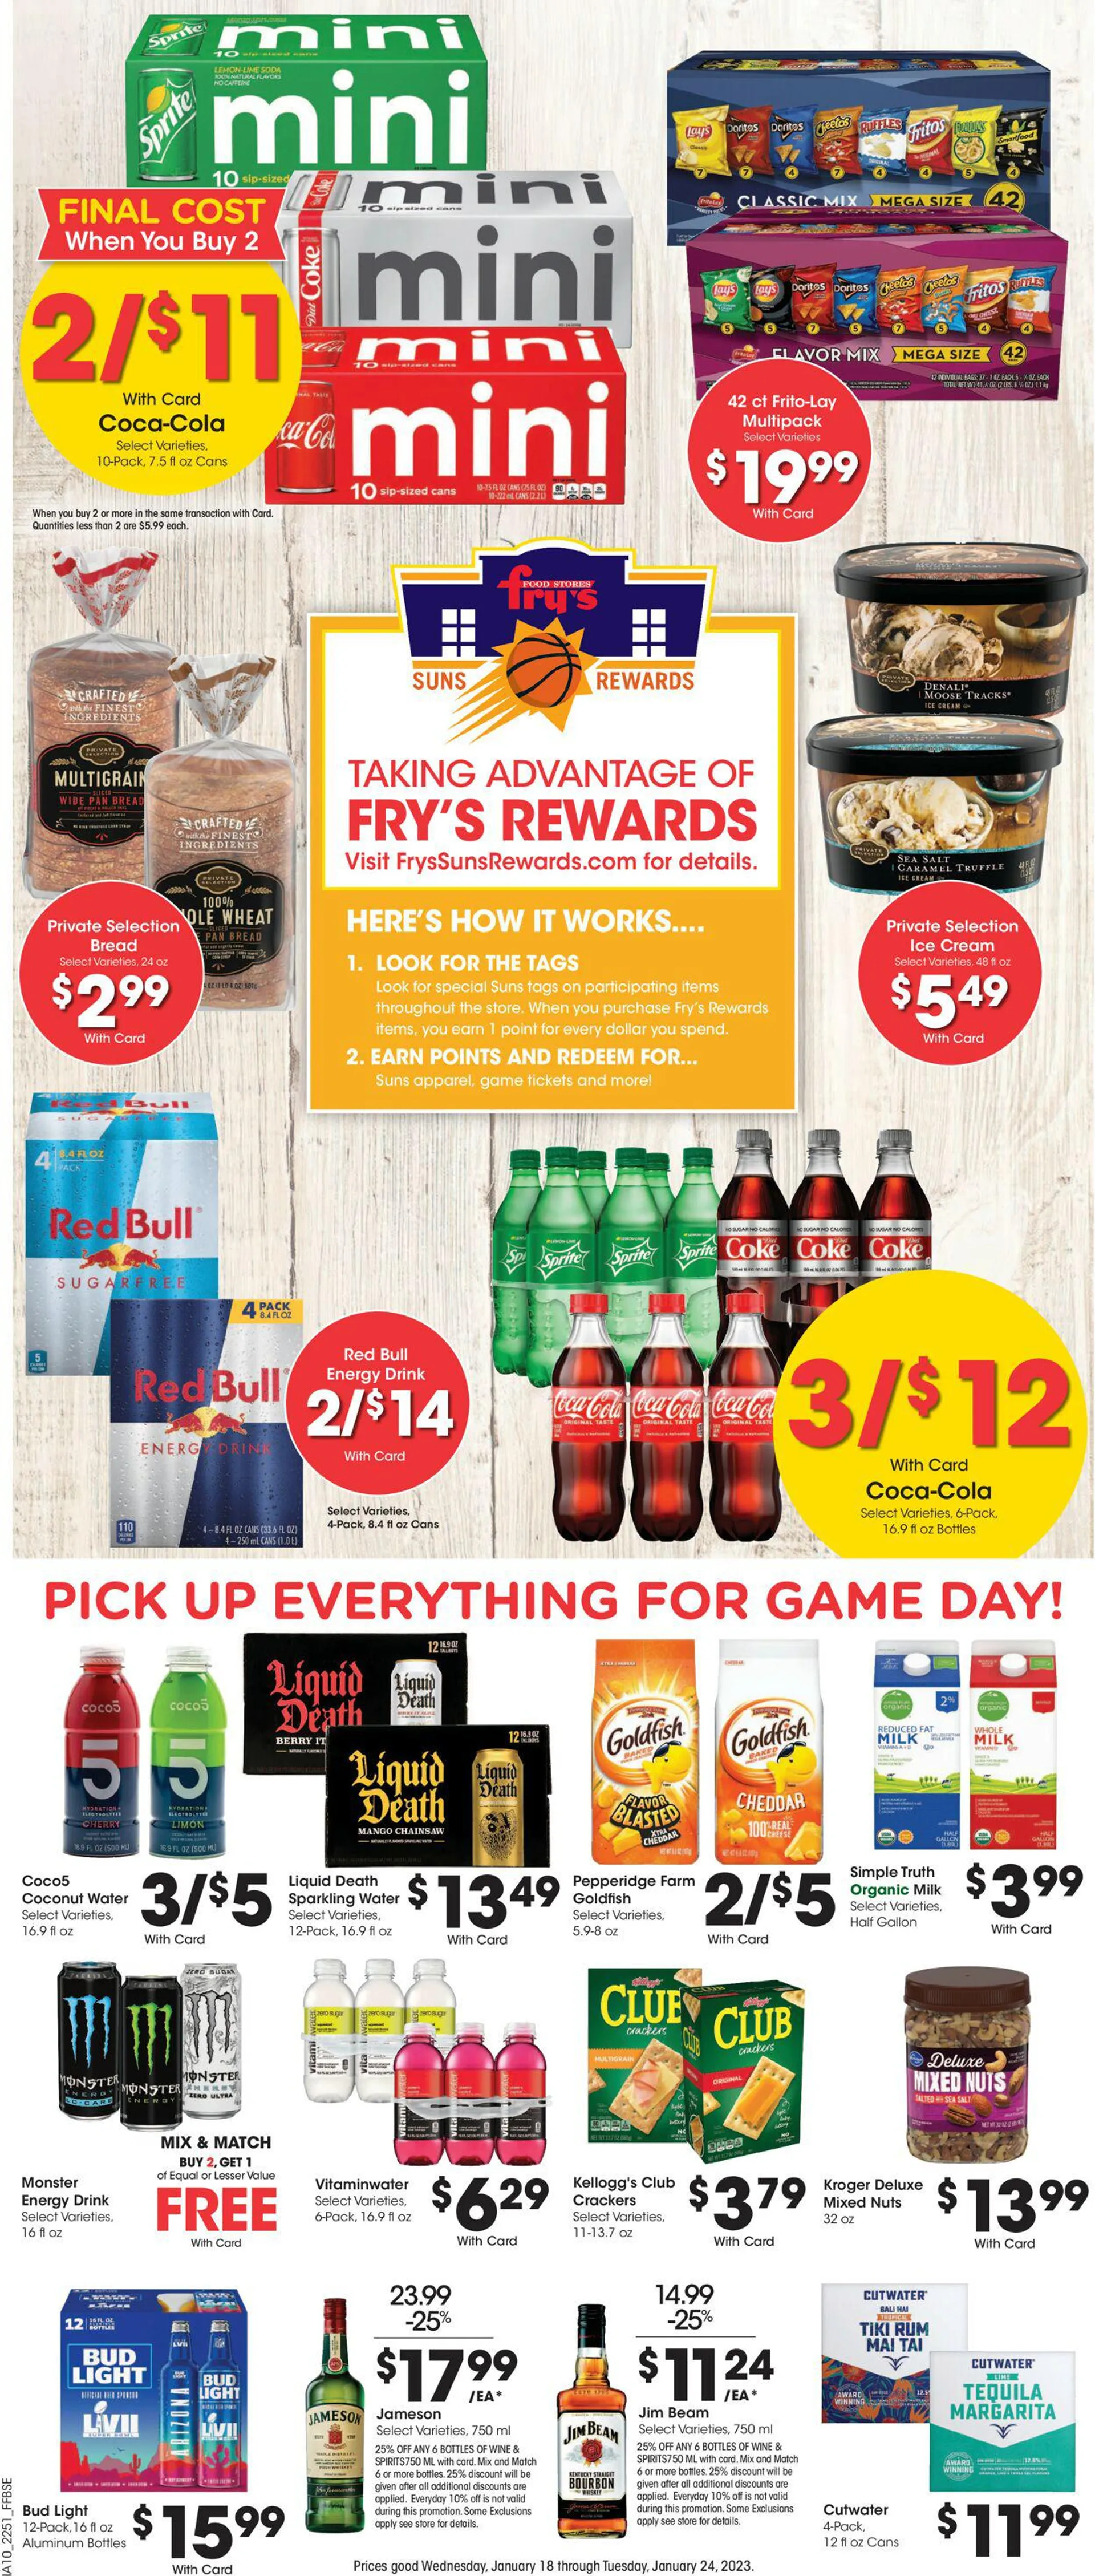 Fry’s Current weekly ad - 15